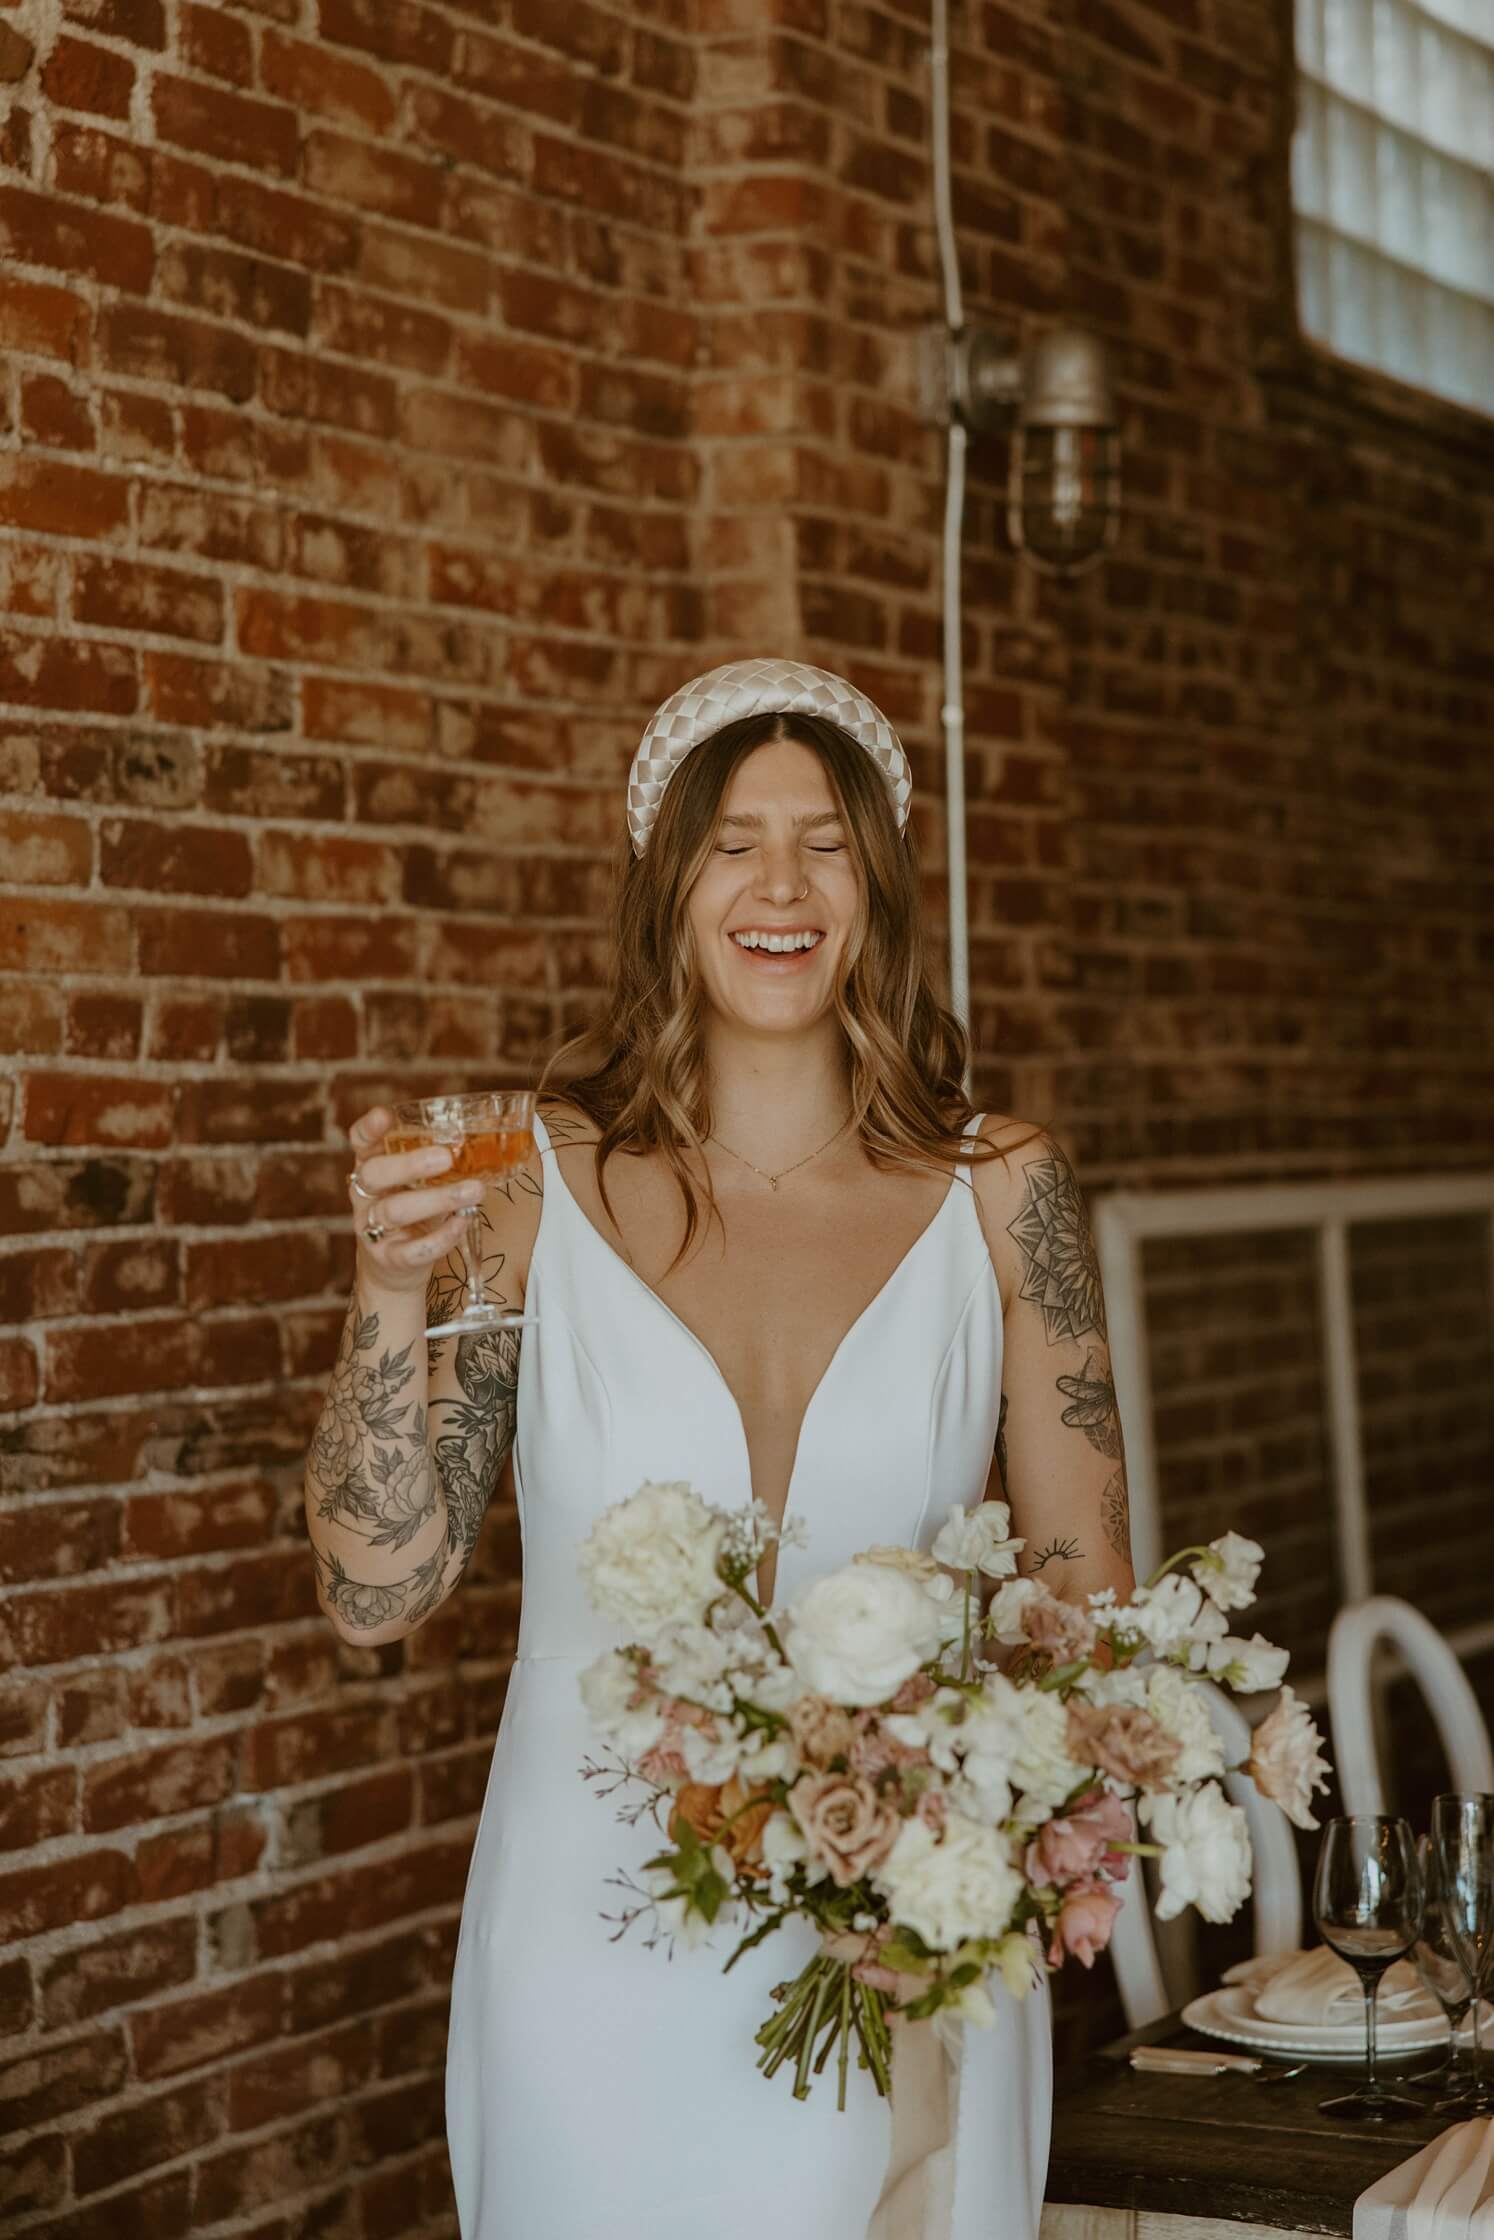 Bride wearing statement headband laughing and holding champagne | McArthur Weddings and Events